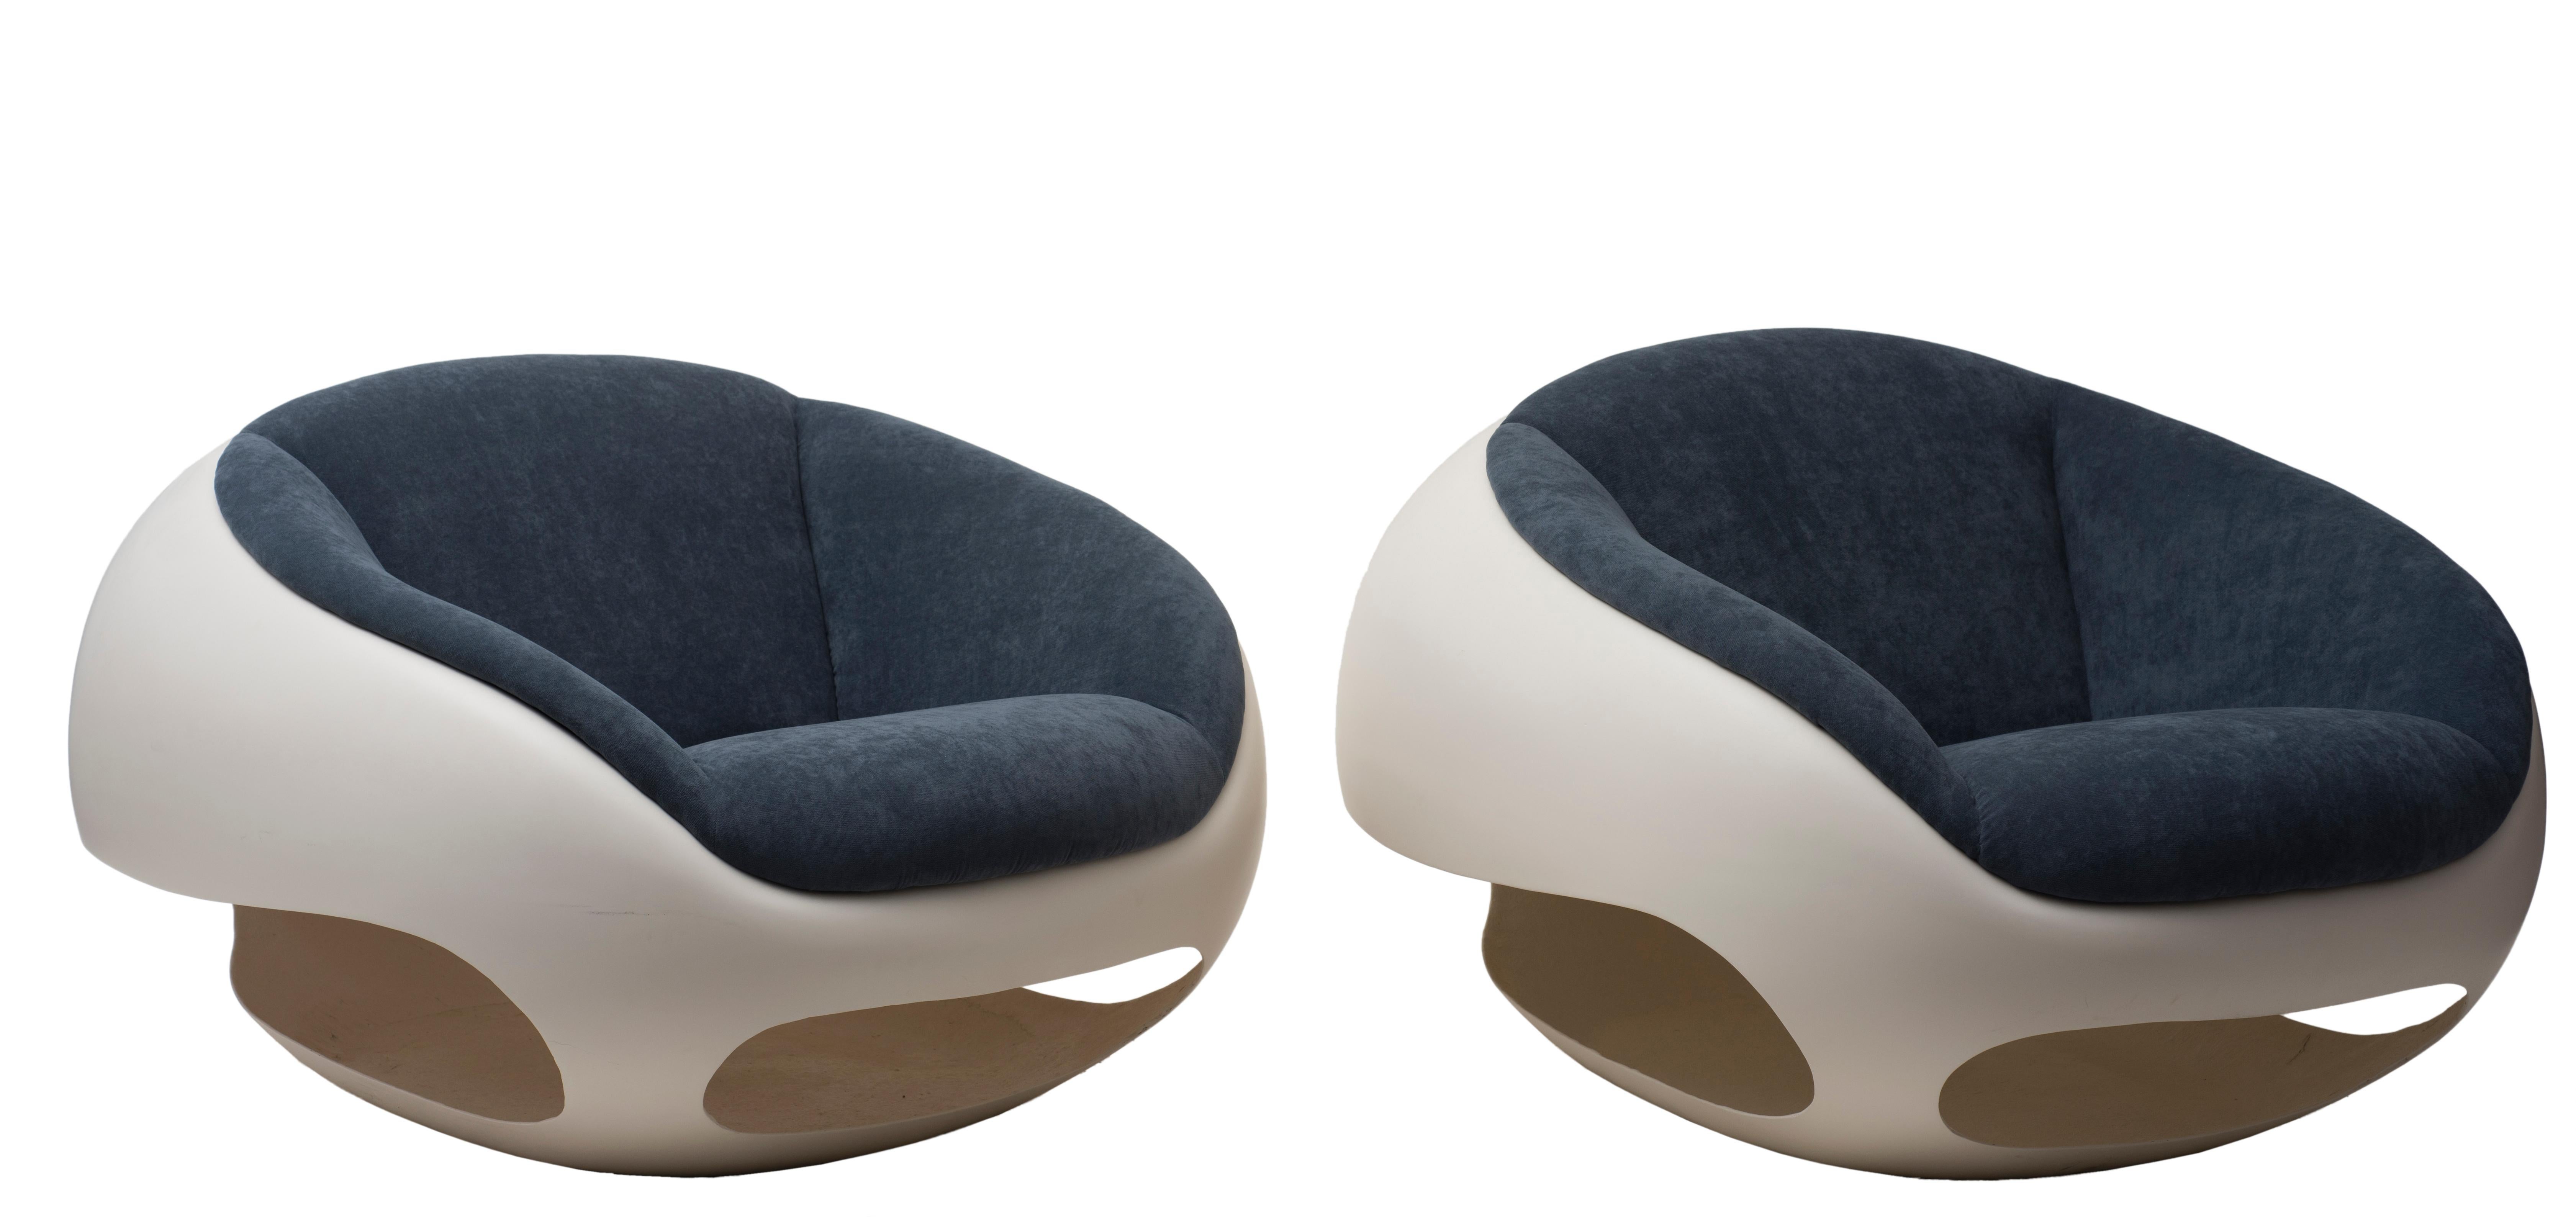 Pair of Fiberglass lounge chairs is an Italian set of two exceptional chairs realized by the Italian designer Mario Sabot (Udine, 1969).

Each chair is composed by a white fiberglass base and a blue woolen upholstery seat and is in good